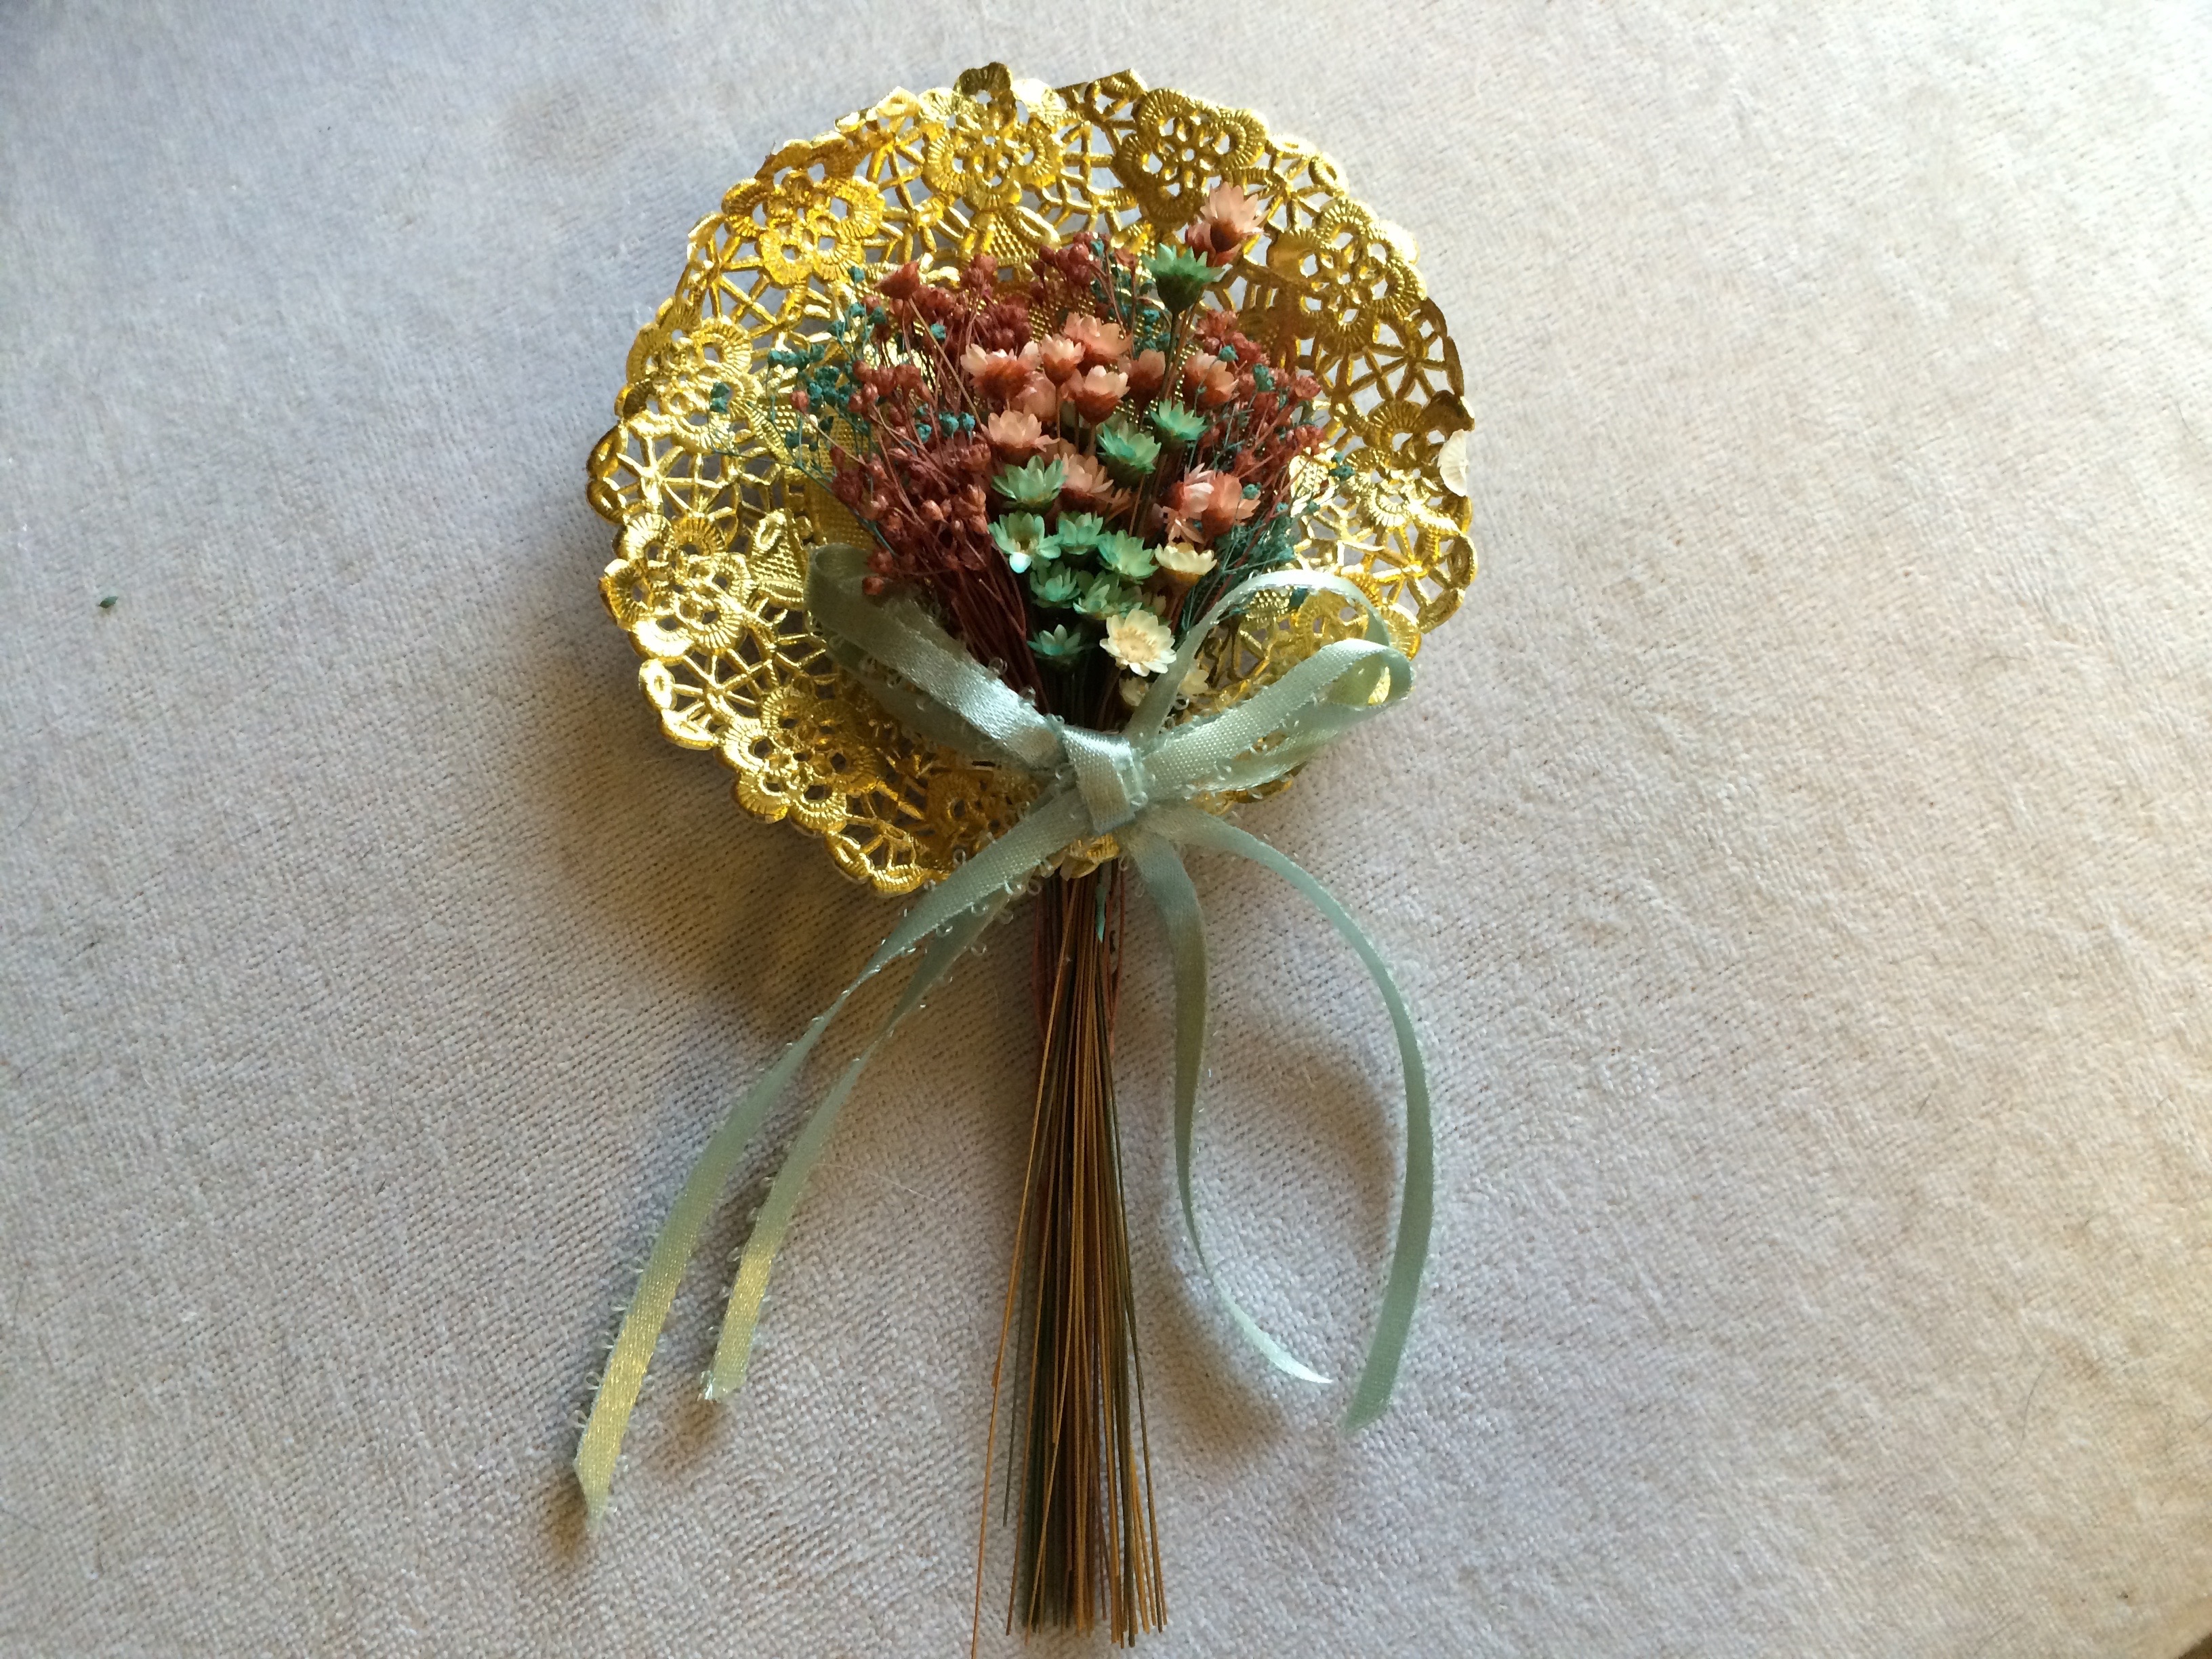 Vintage 1980s Gold Doily Dried Flowers Bouquet Ornament or Table Decor by Annabelle\'s Angels